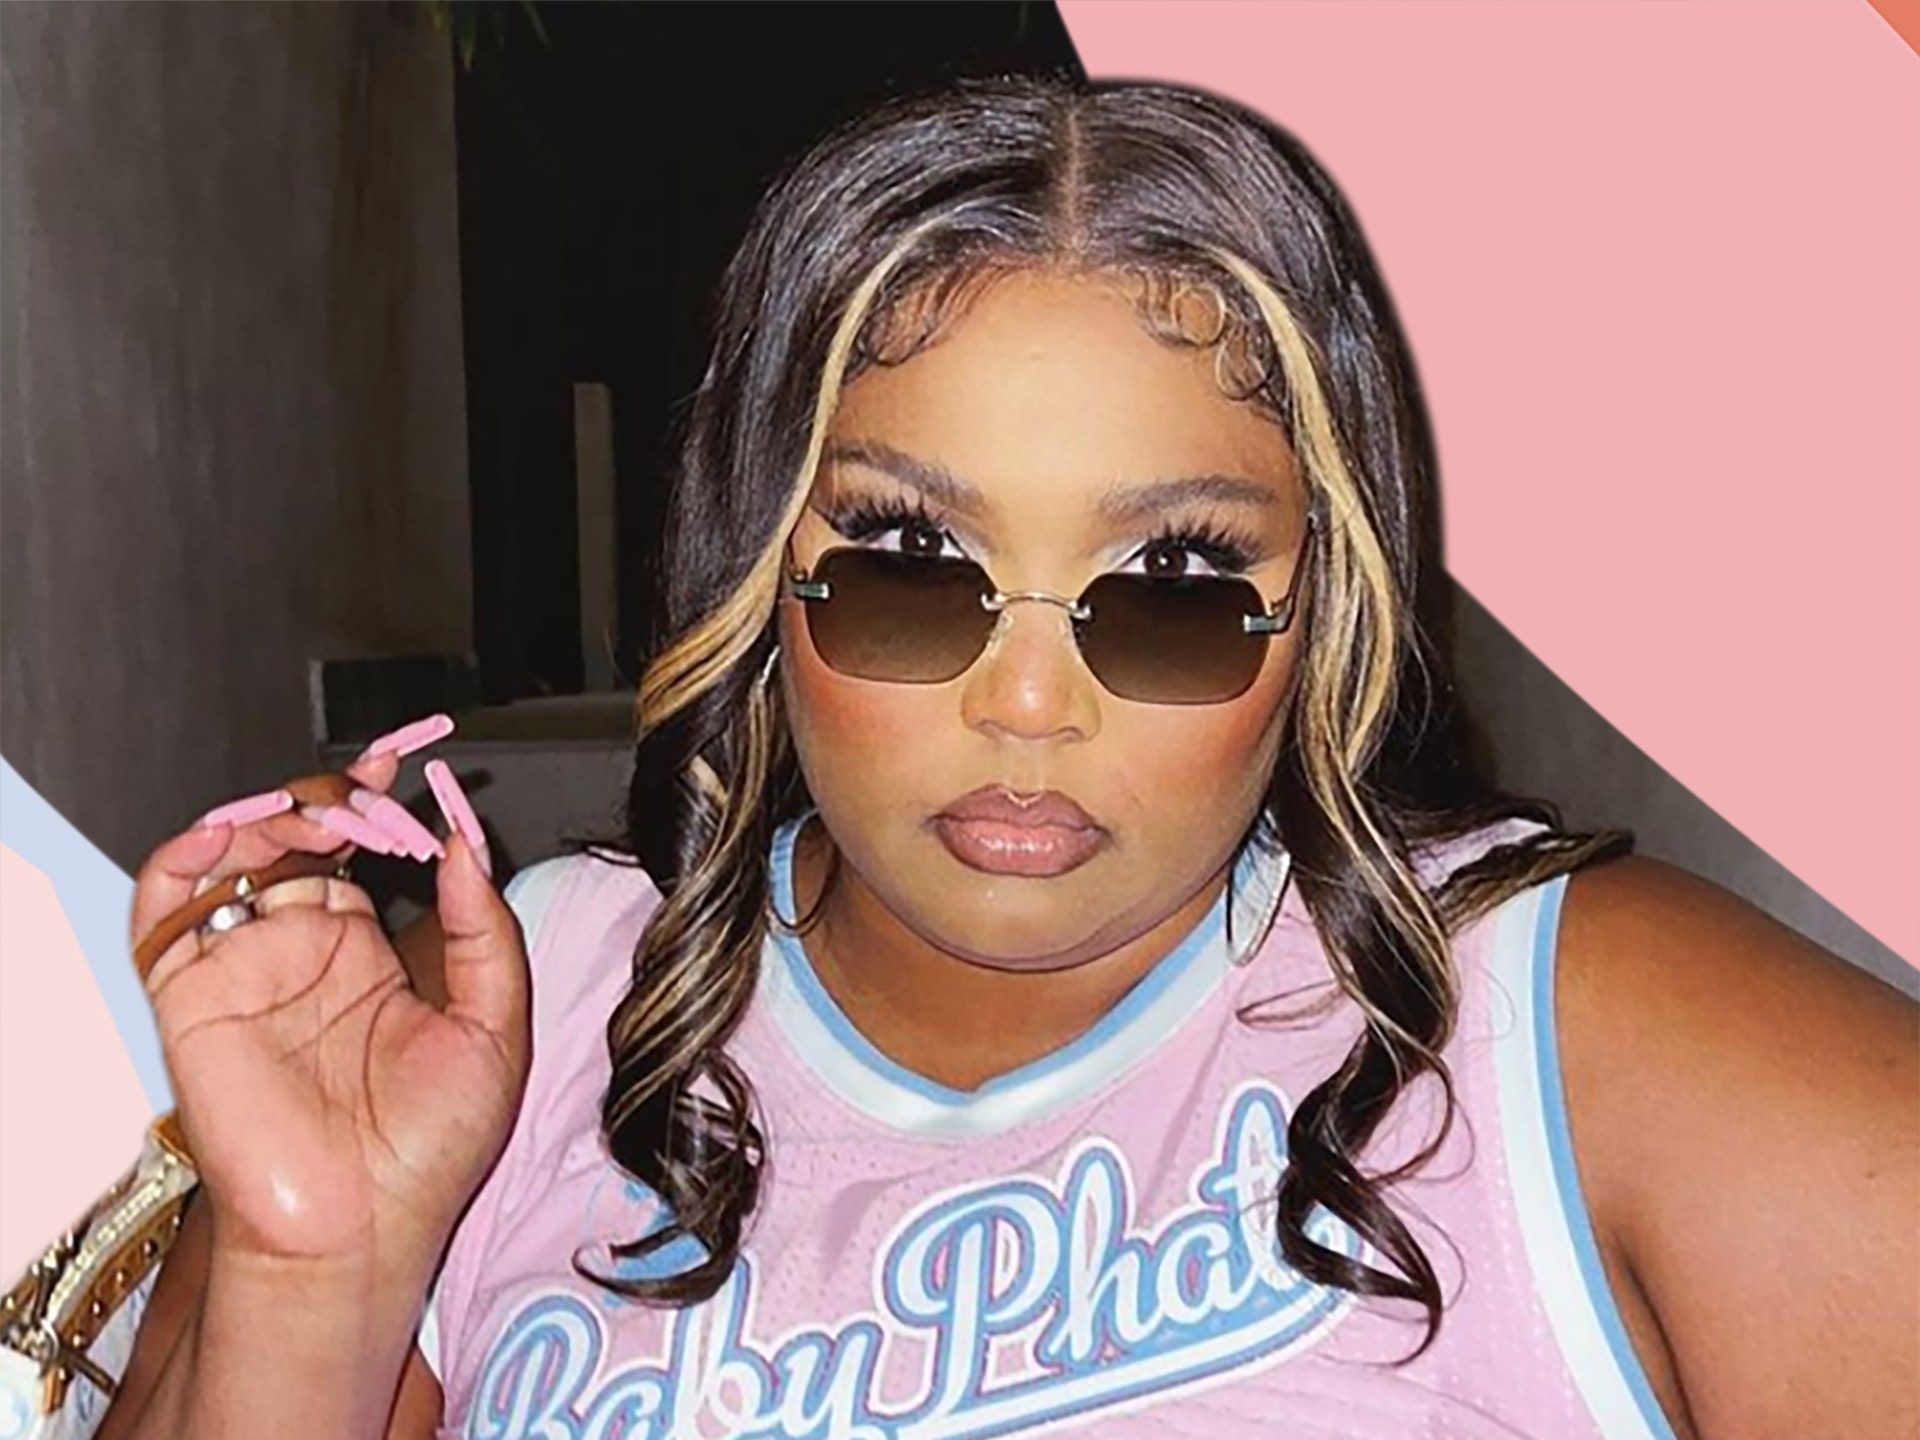 Lizzo wearing a pink basketball jersey and sunglasses, holding a pink claw. - 2000s